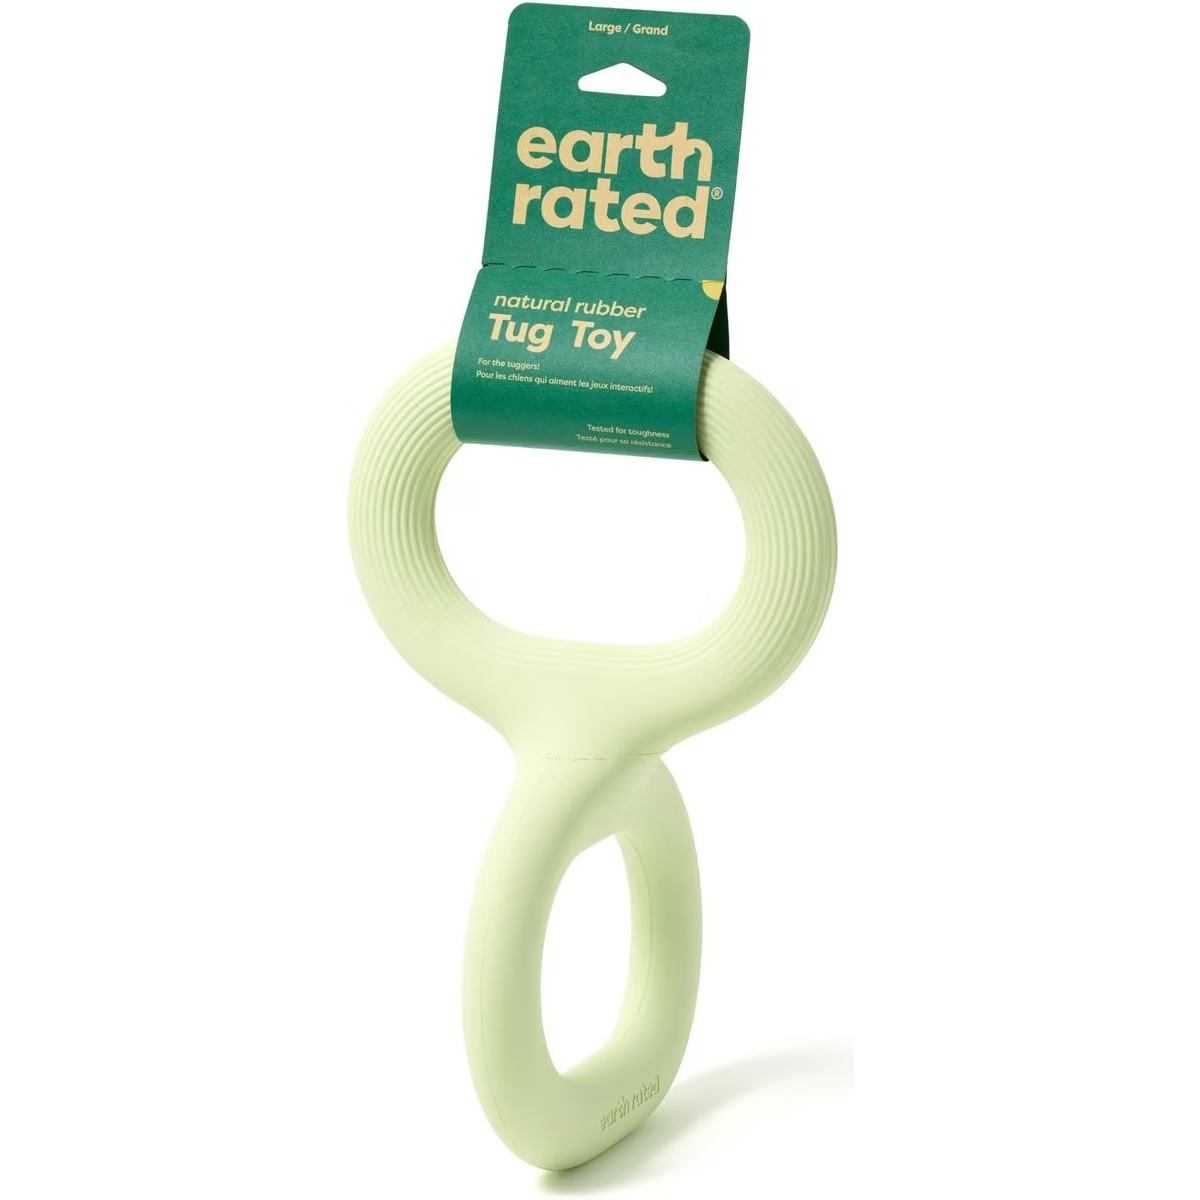 Earth Rated Tug Dog Toy 